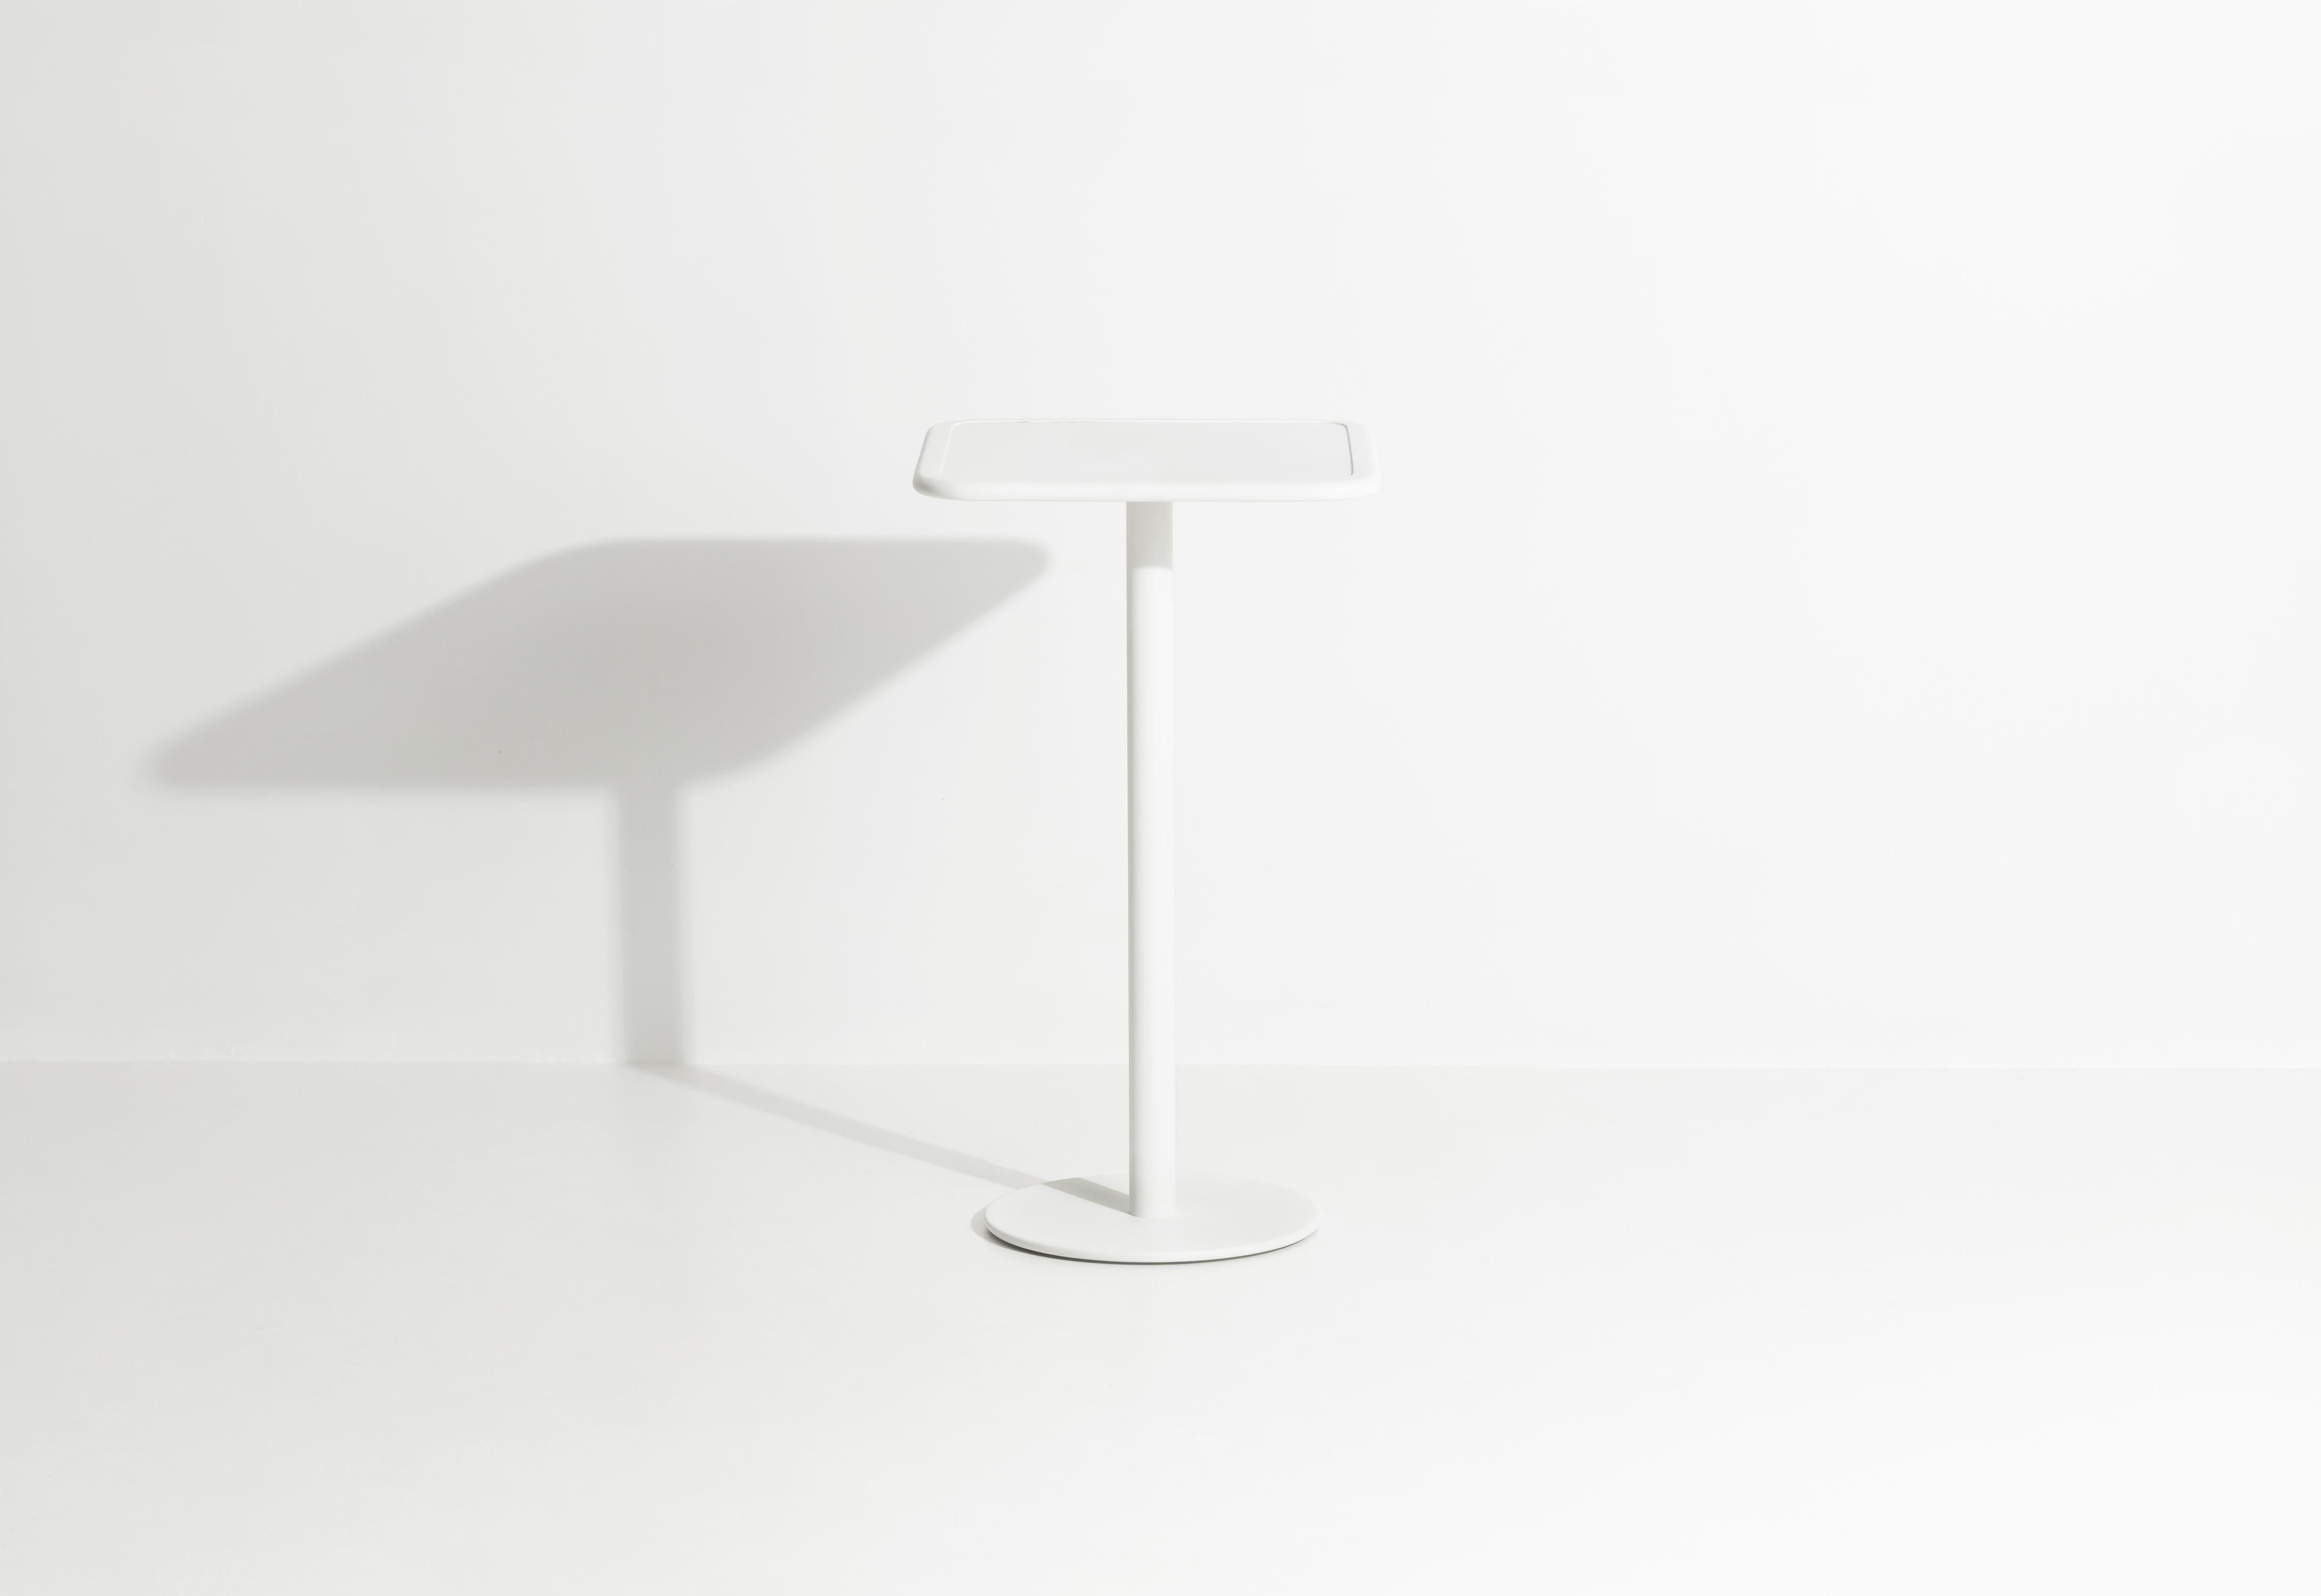 Petite Friture Week-End Square High Table in White Aluminium, 2017 In New Condition For Sale In Brooklyn, NY